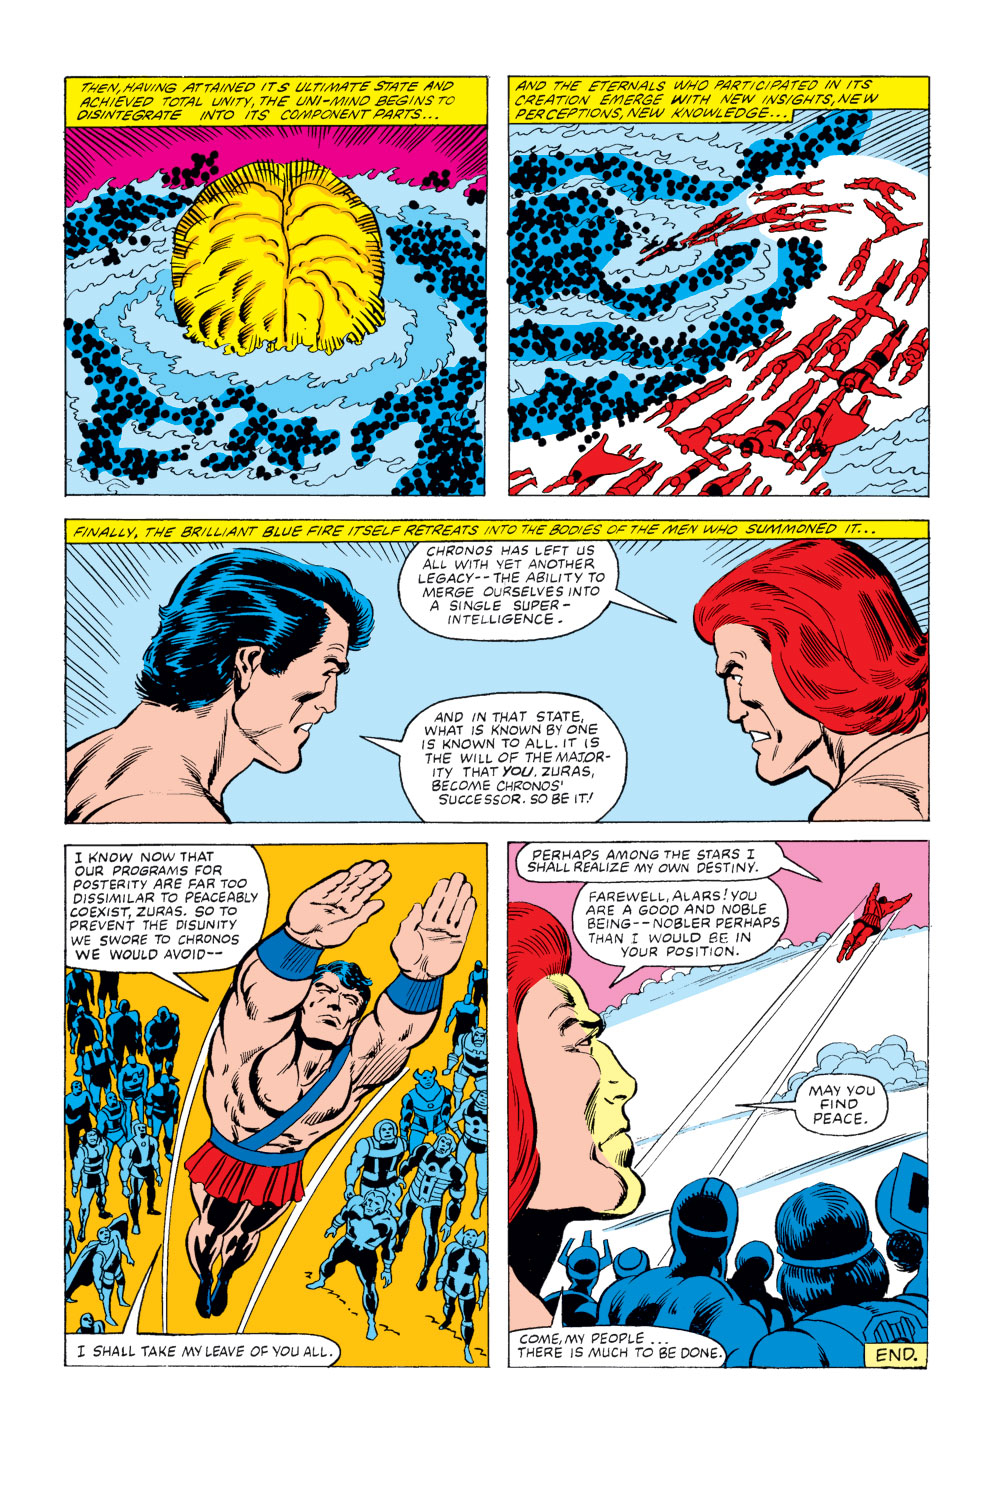 What If? (1977) issue 25 - Thor and the Avengers battled the gods - Page 39